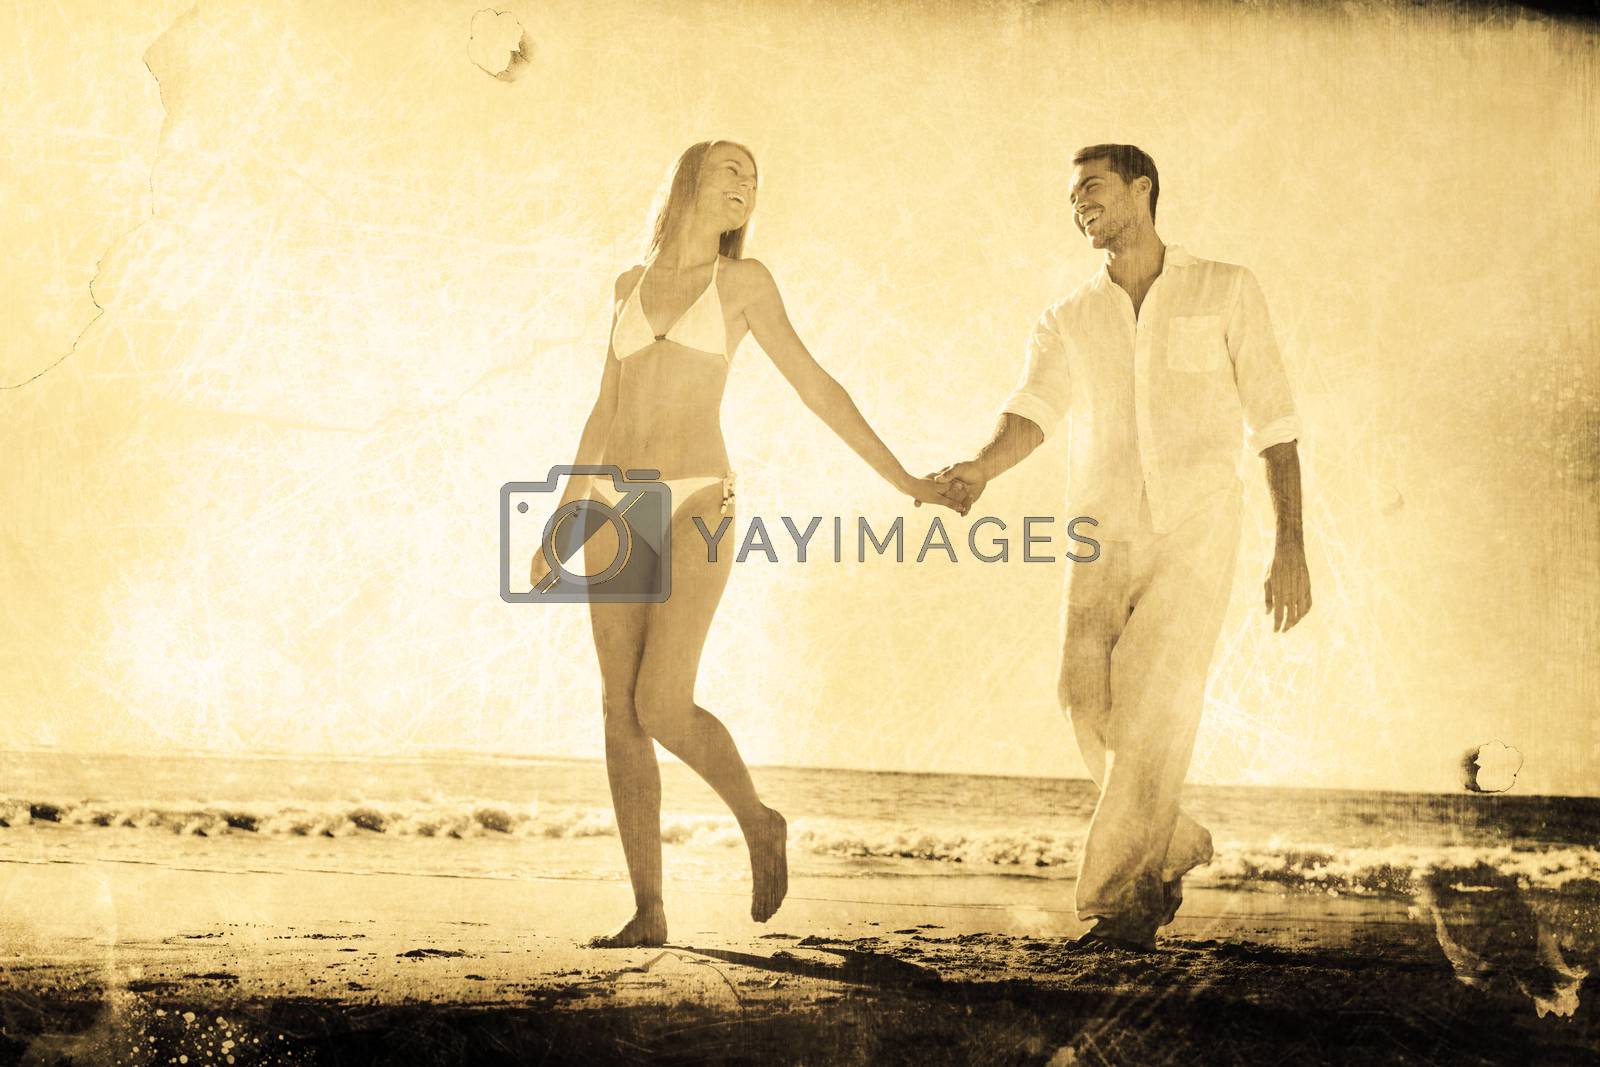 Royalty free image of Composite image of pretty blonde walking away from man holding her hand by Wavebreakmedia